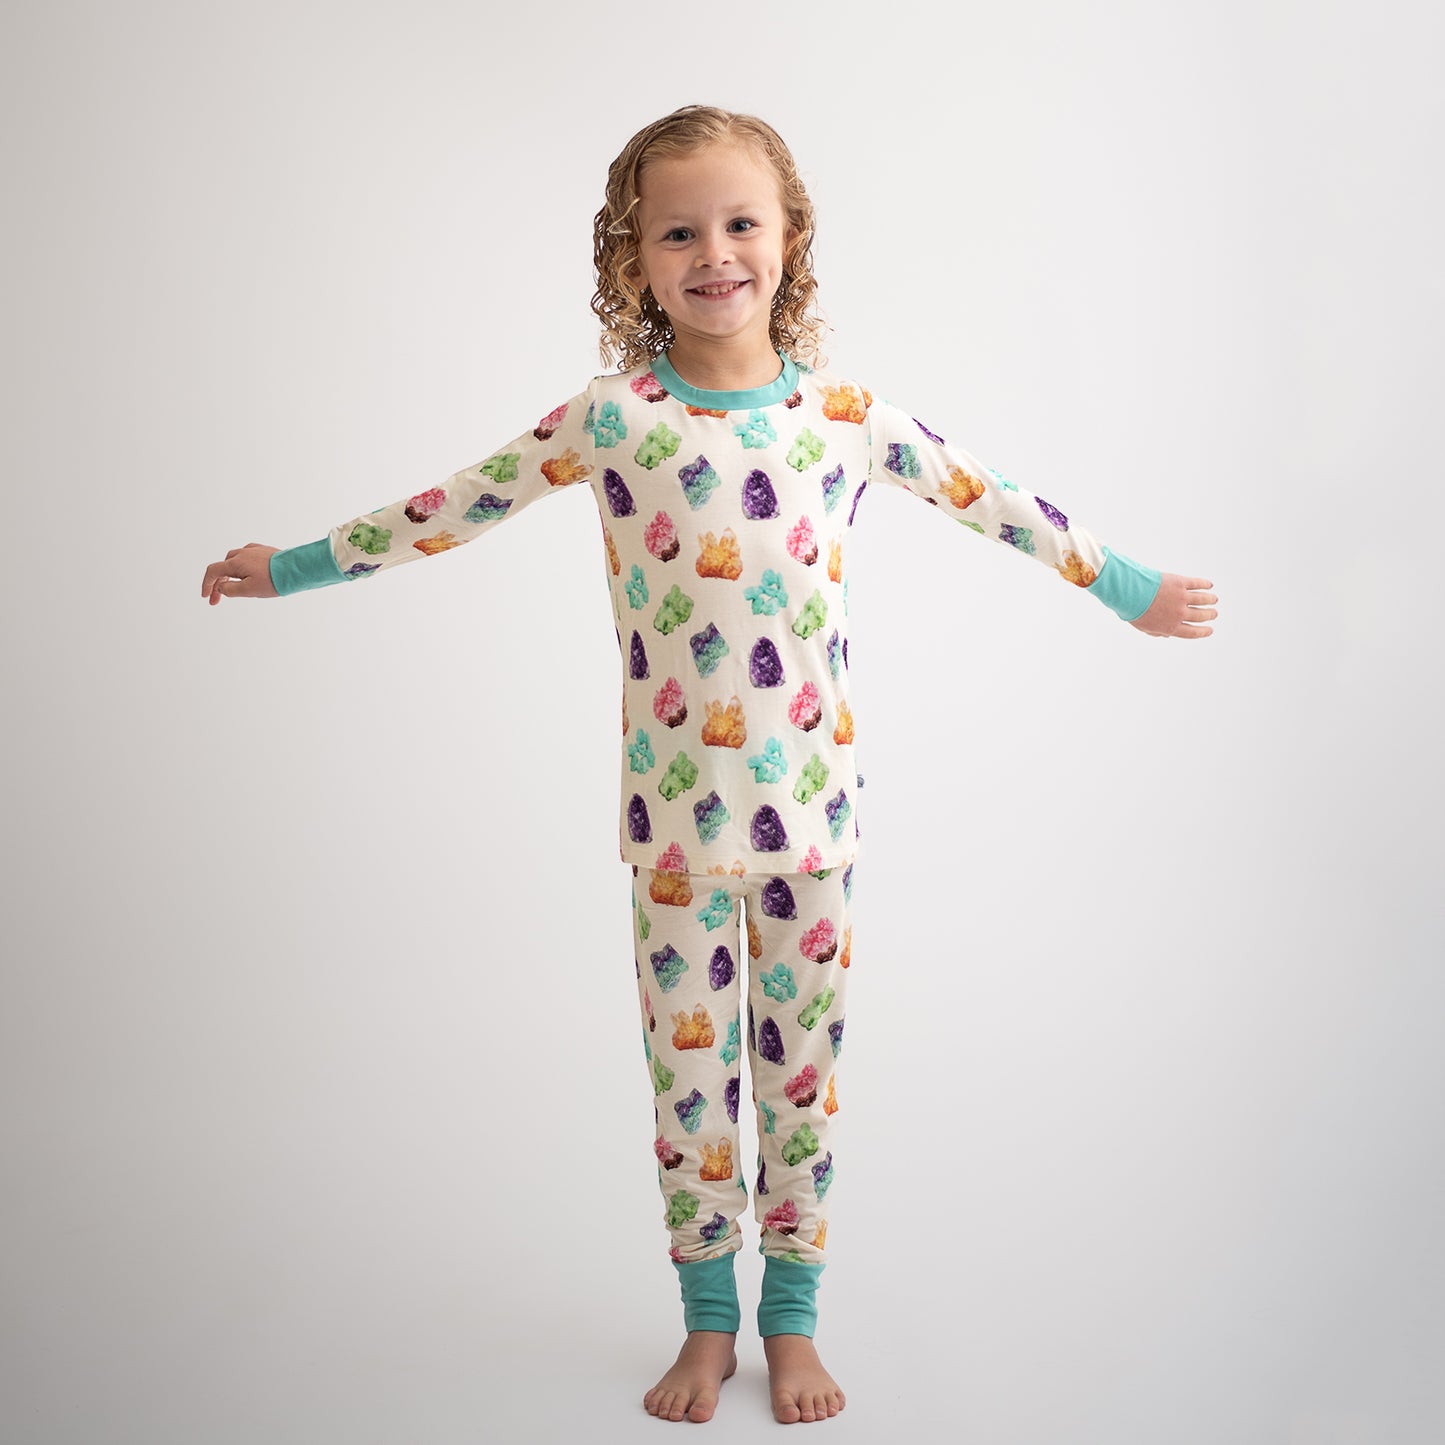 crystal two piece bamboo pajamas being worn by girl